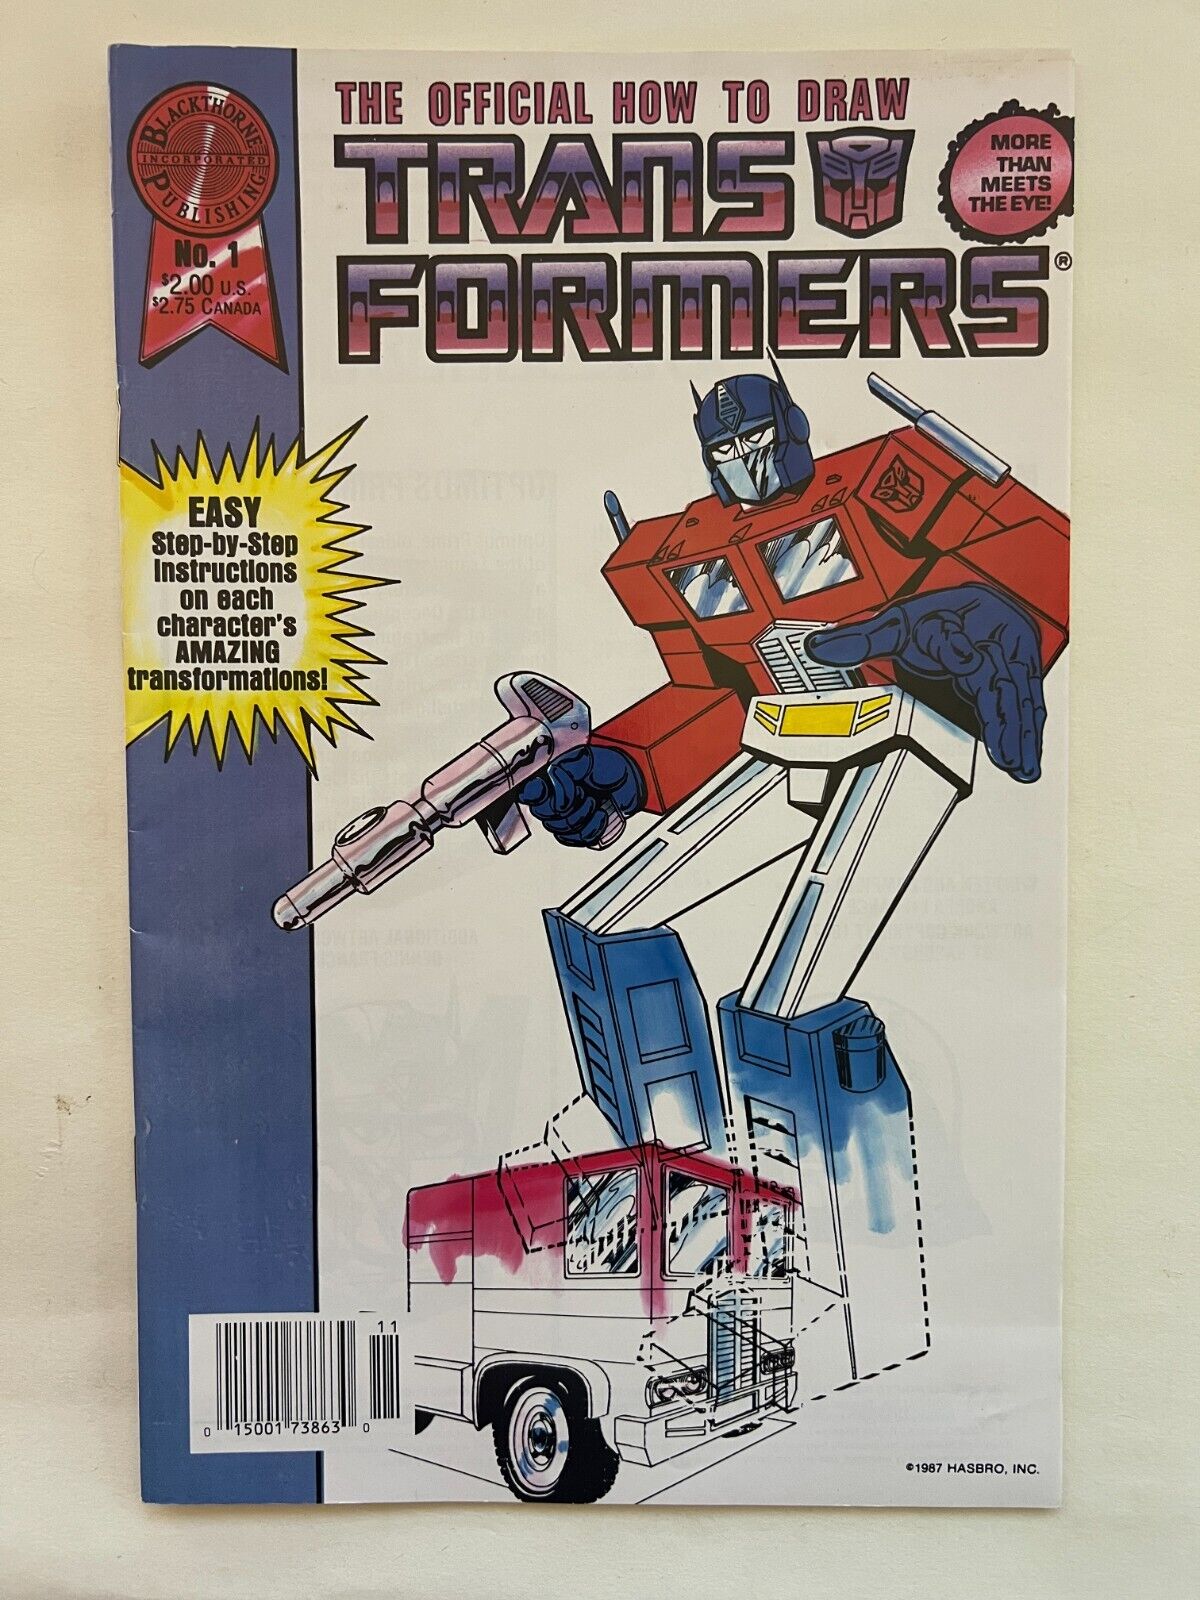 The Official How To Draw The TRANSFORMERS #1 (Blackthorn Publishing, Nov 1987)